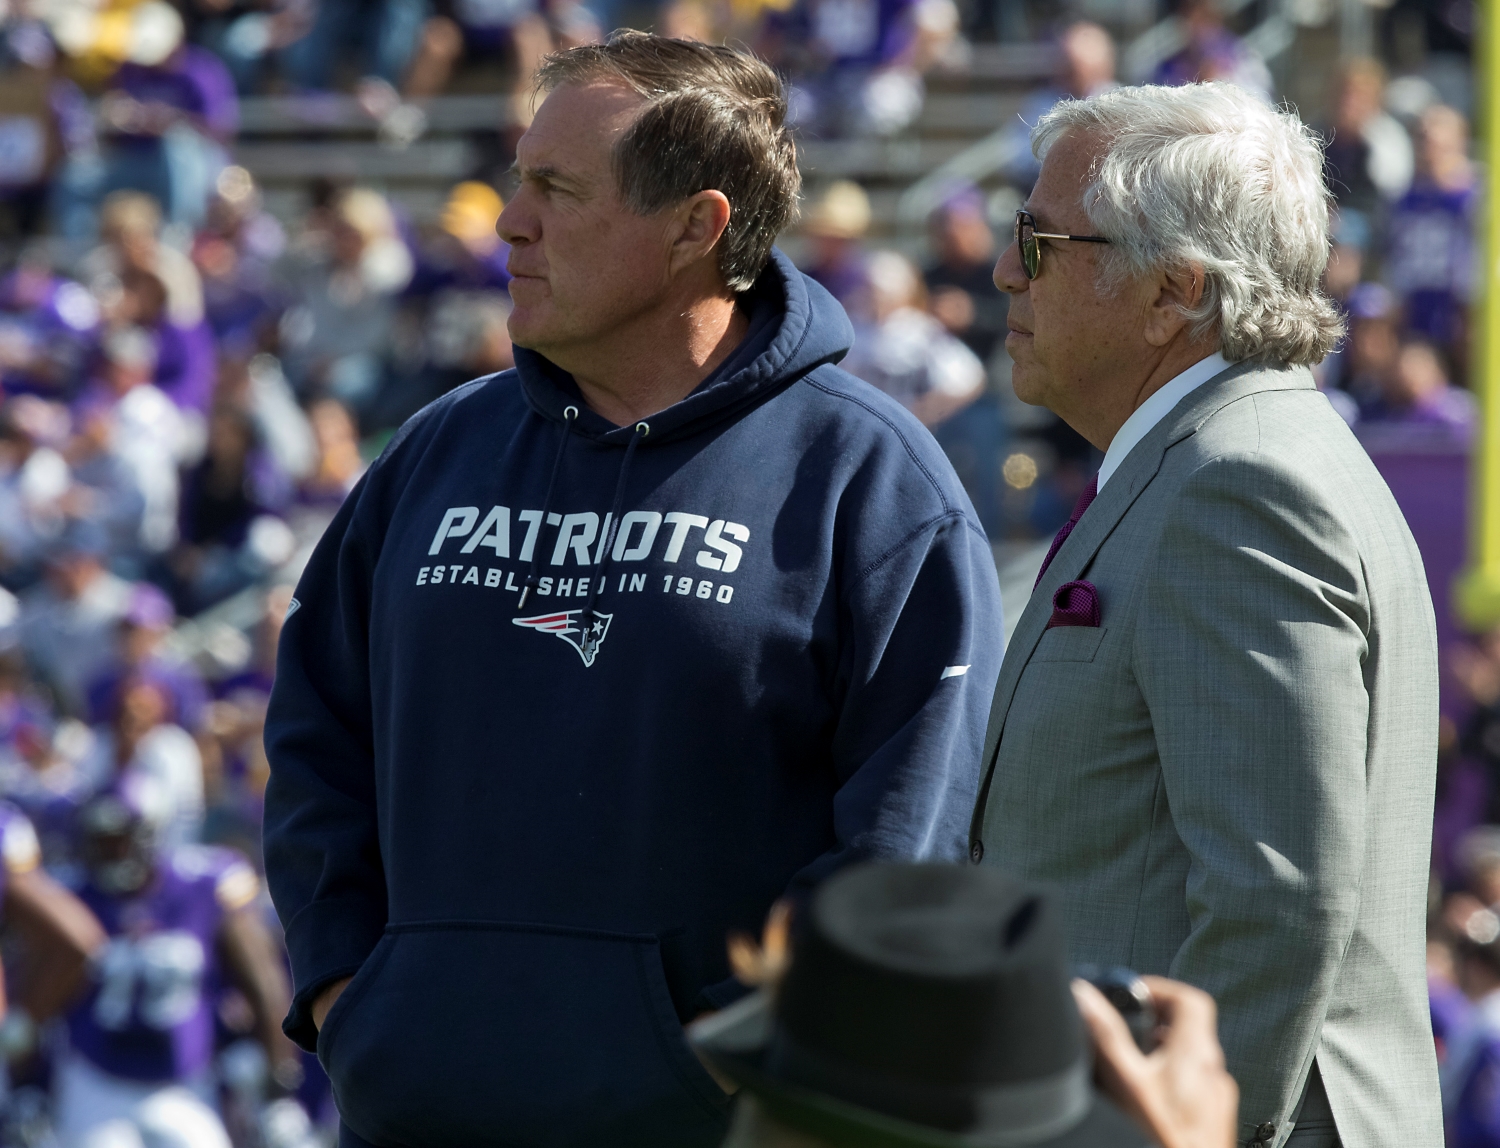 Bill Belichick stands next to New England Patriots owner Robert Kraft before a game against the Minnesota Vikings.